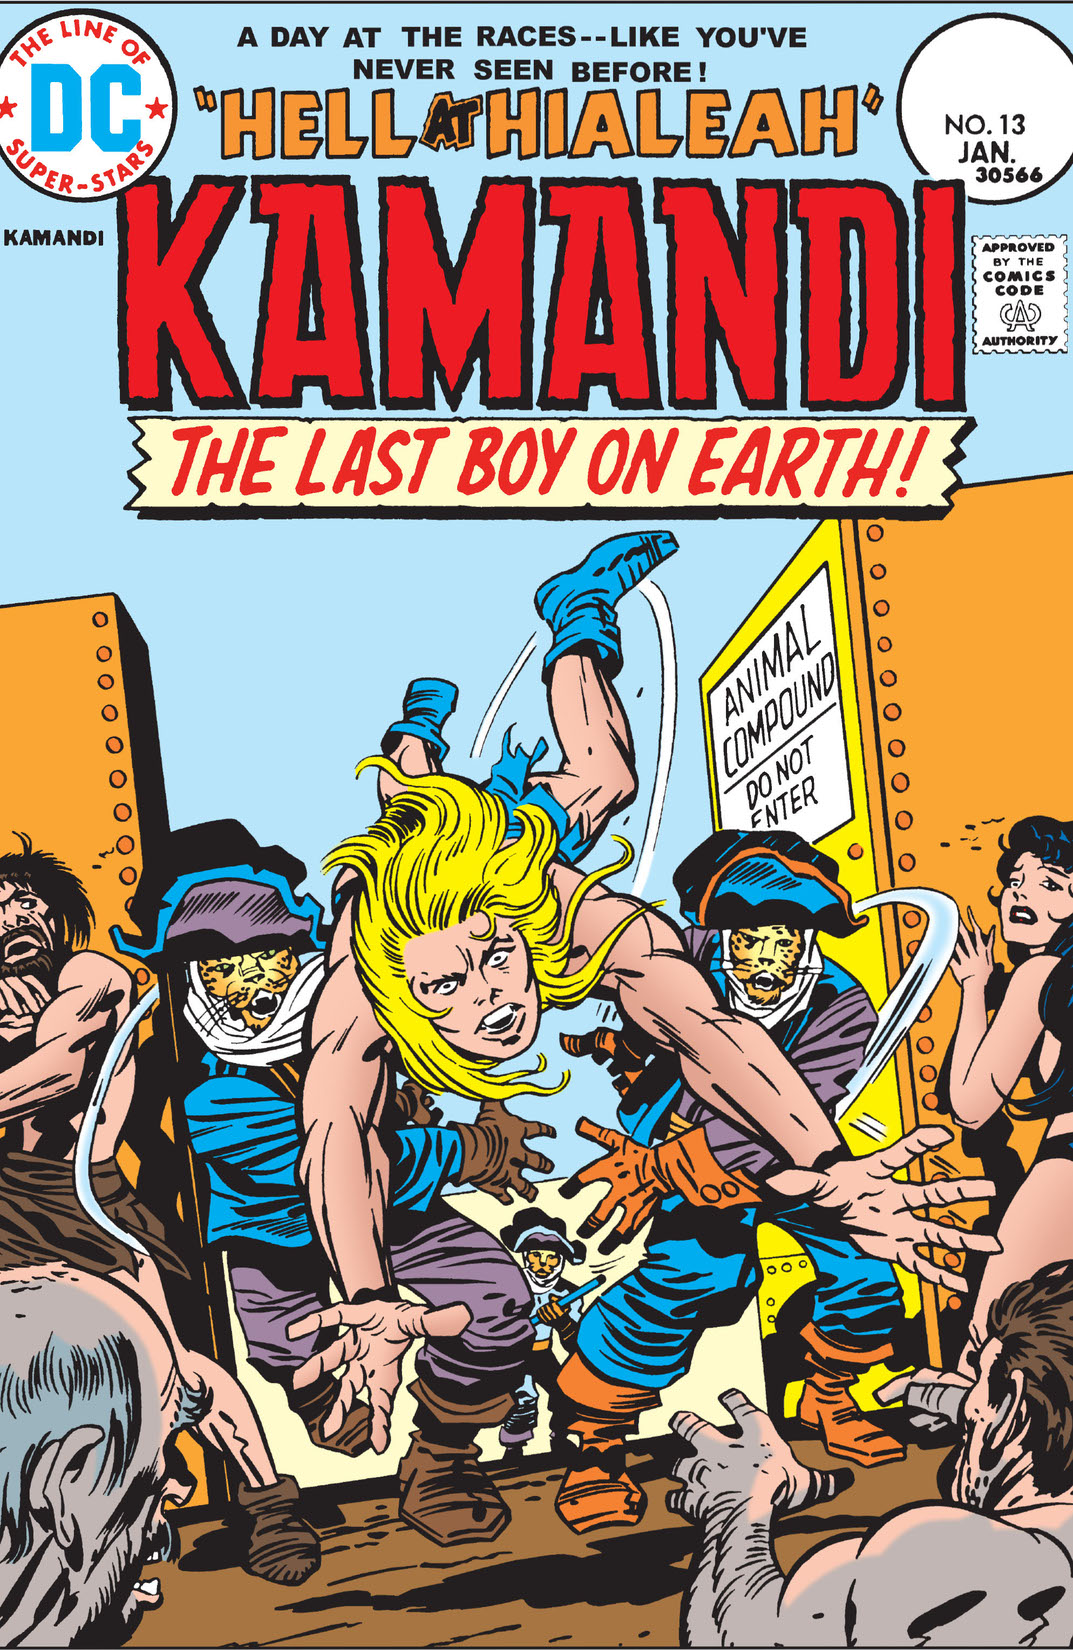 Kamandi: The Last Boy on Earth #13 preview images